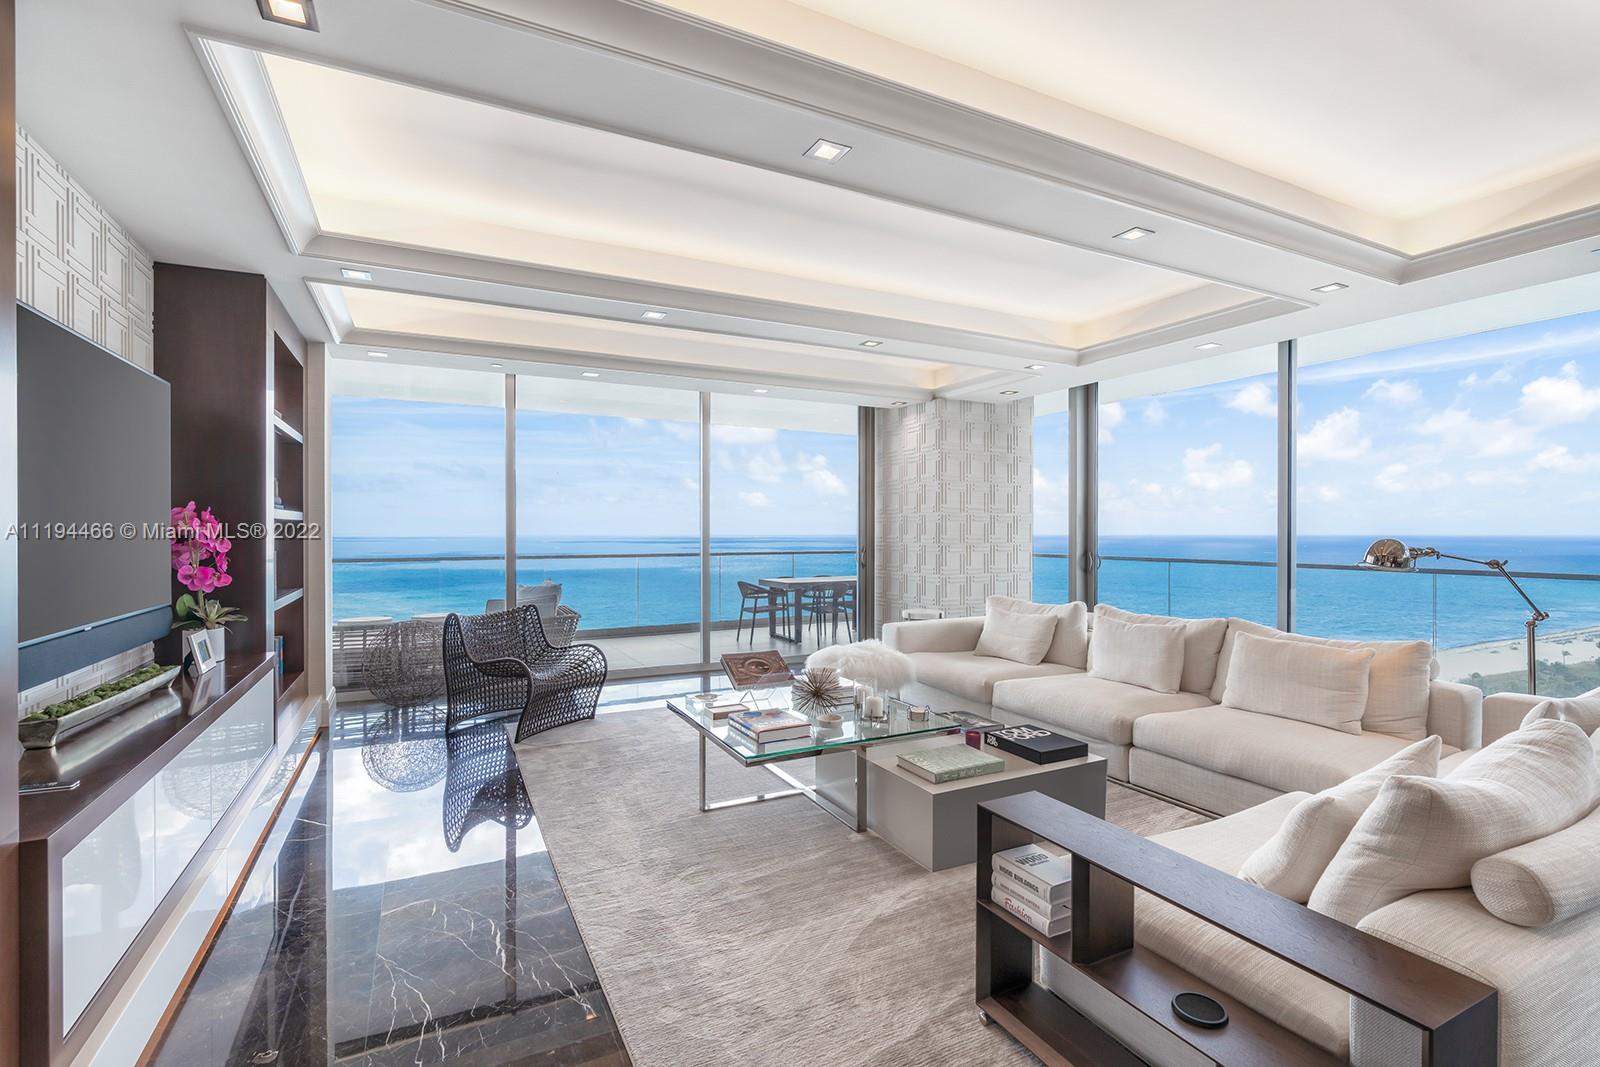 Turn-key oceanfront corner residence presents a rare opportunity to own at Bal Harbour most sought-after address, with panoramic water and skyline views. Offering the building’s premier floorplan, the impeccable flow-through S. Tower unit underwent close to $3Mil renovation with no detail left unturned. Features of the expansive 4,185SF space include a new gourmet kitchen, custom bar, oversized master with walk-in closets, spa-inspired bath, private elevator entry, floor-to-ceiling sliding doors that open up to a 1,500SF wrap-around terrace, plus impeccable finishes and millwork throughout. Oceana offers an exclusive lifestyle and intimate community with resort-style amenities including Olympic-style pool, world-class spa, tennis courts, restaurant, 24-hour concierge services and security